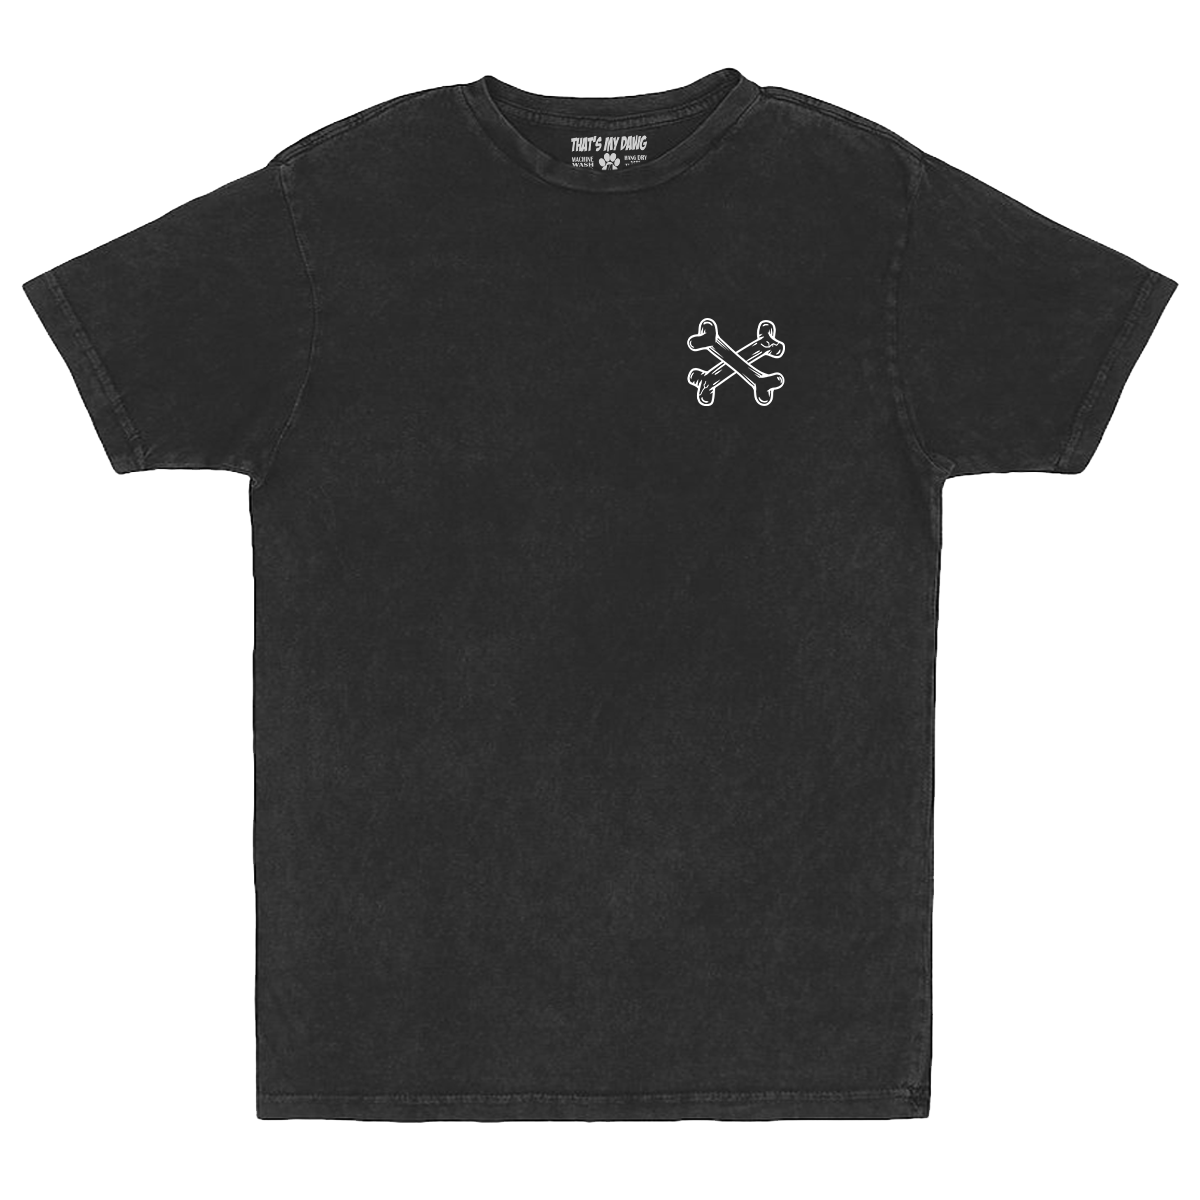 R.I.P. TOYS // Vintage "Puff Ink" T-Shirt